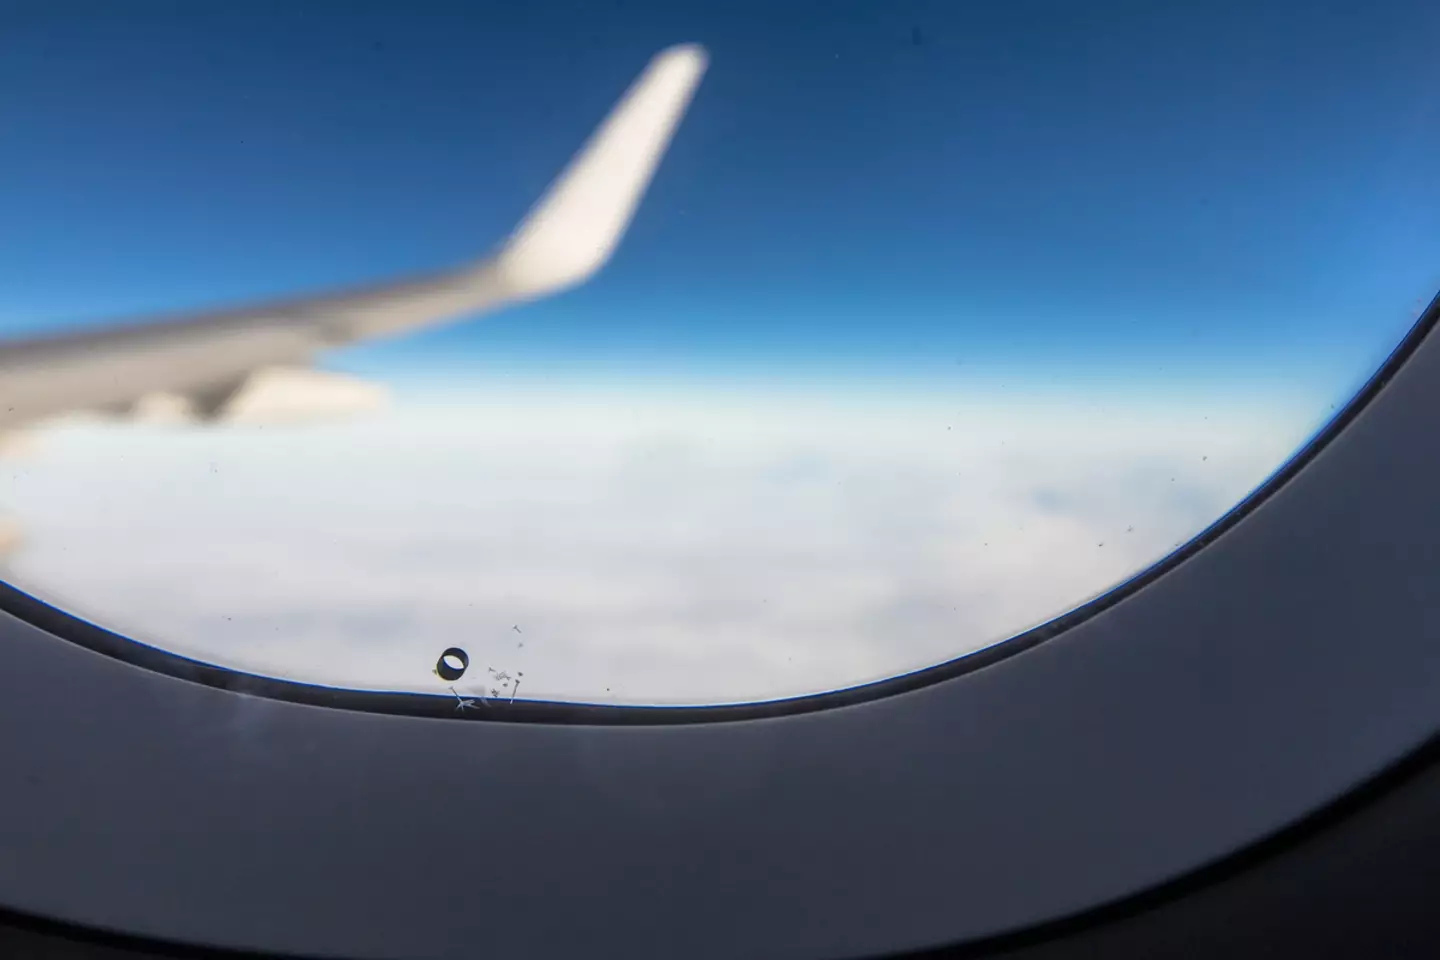 Have you ever noticed the tiny holes in plane windows?